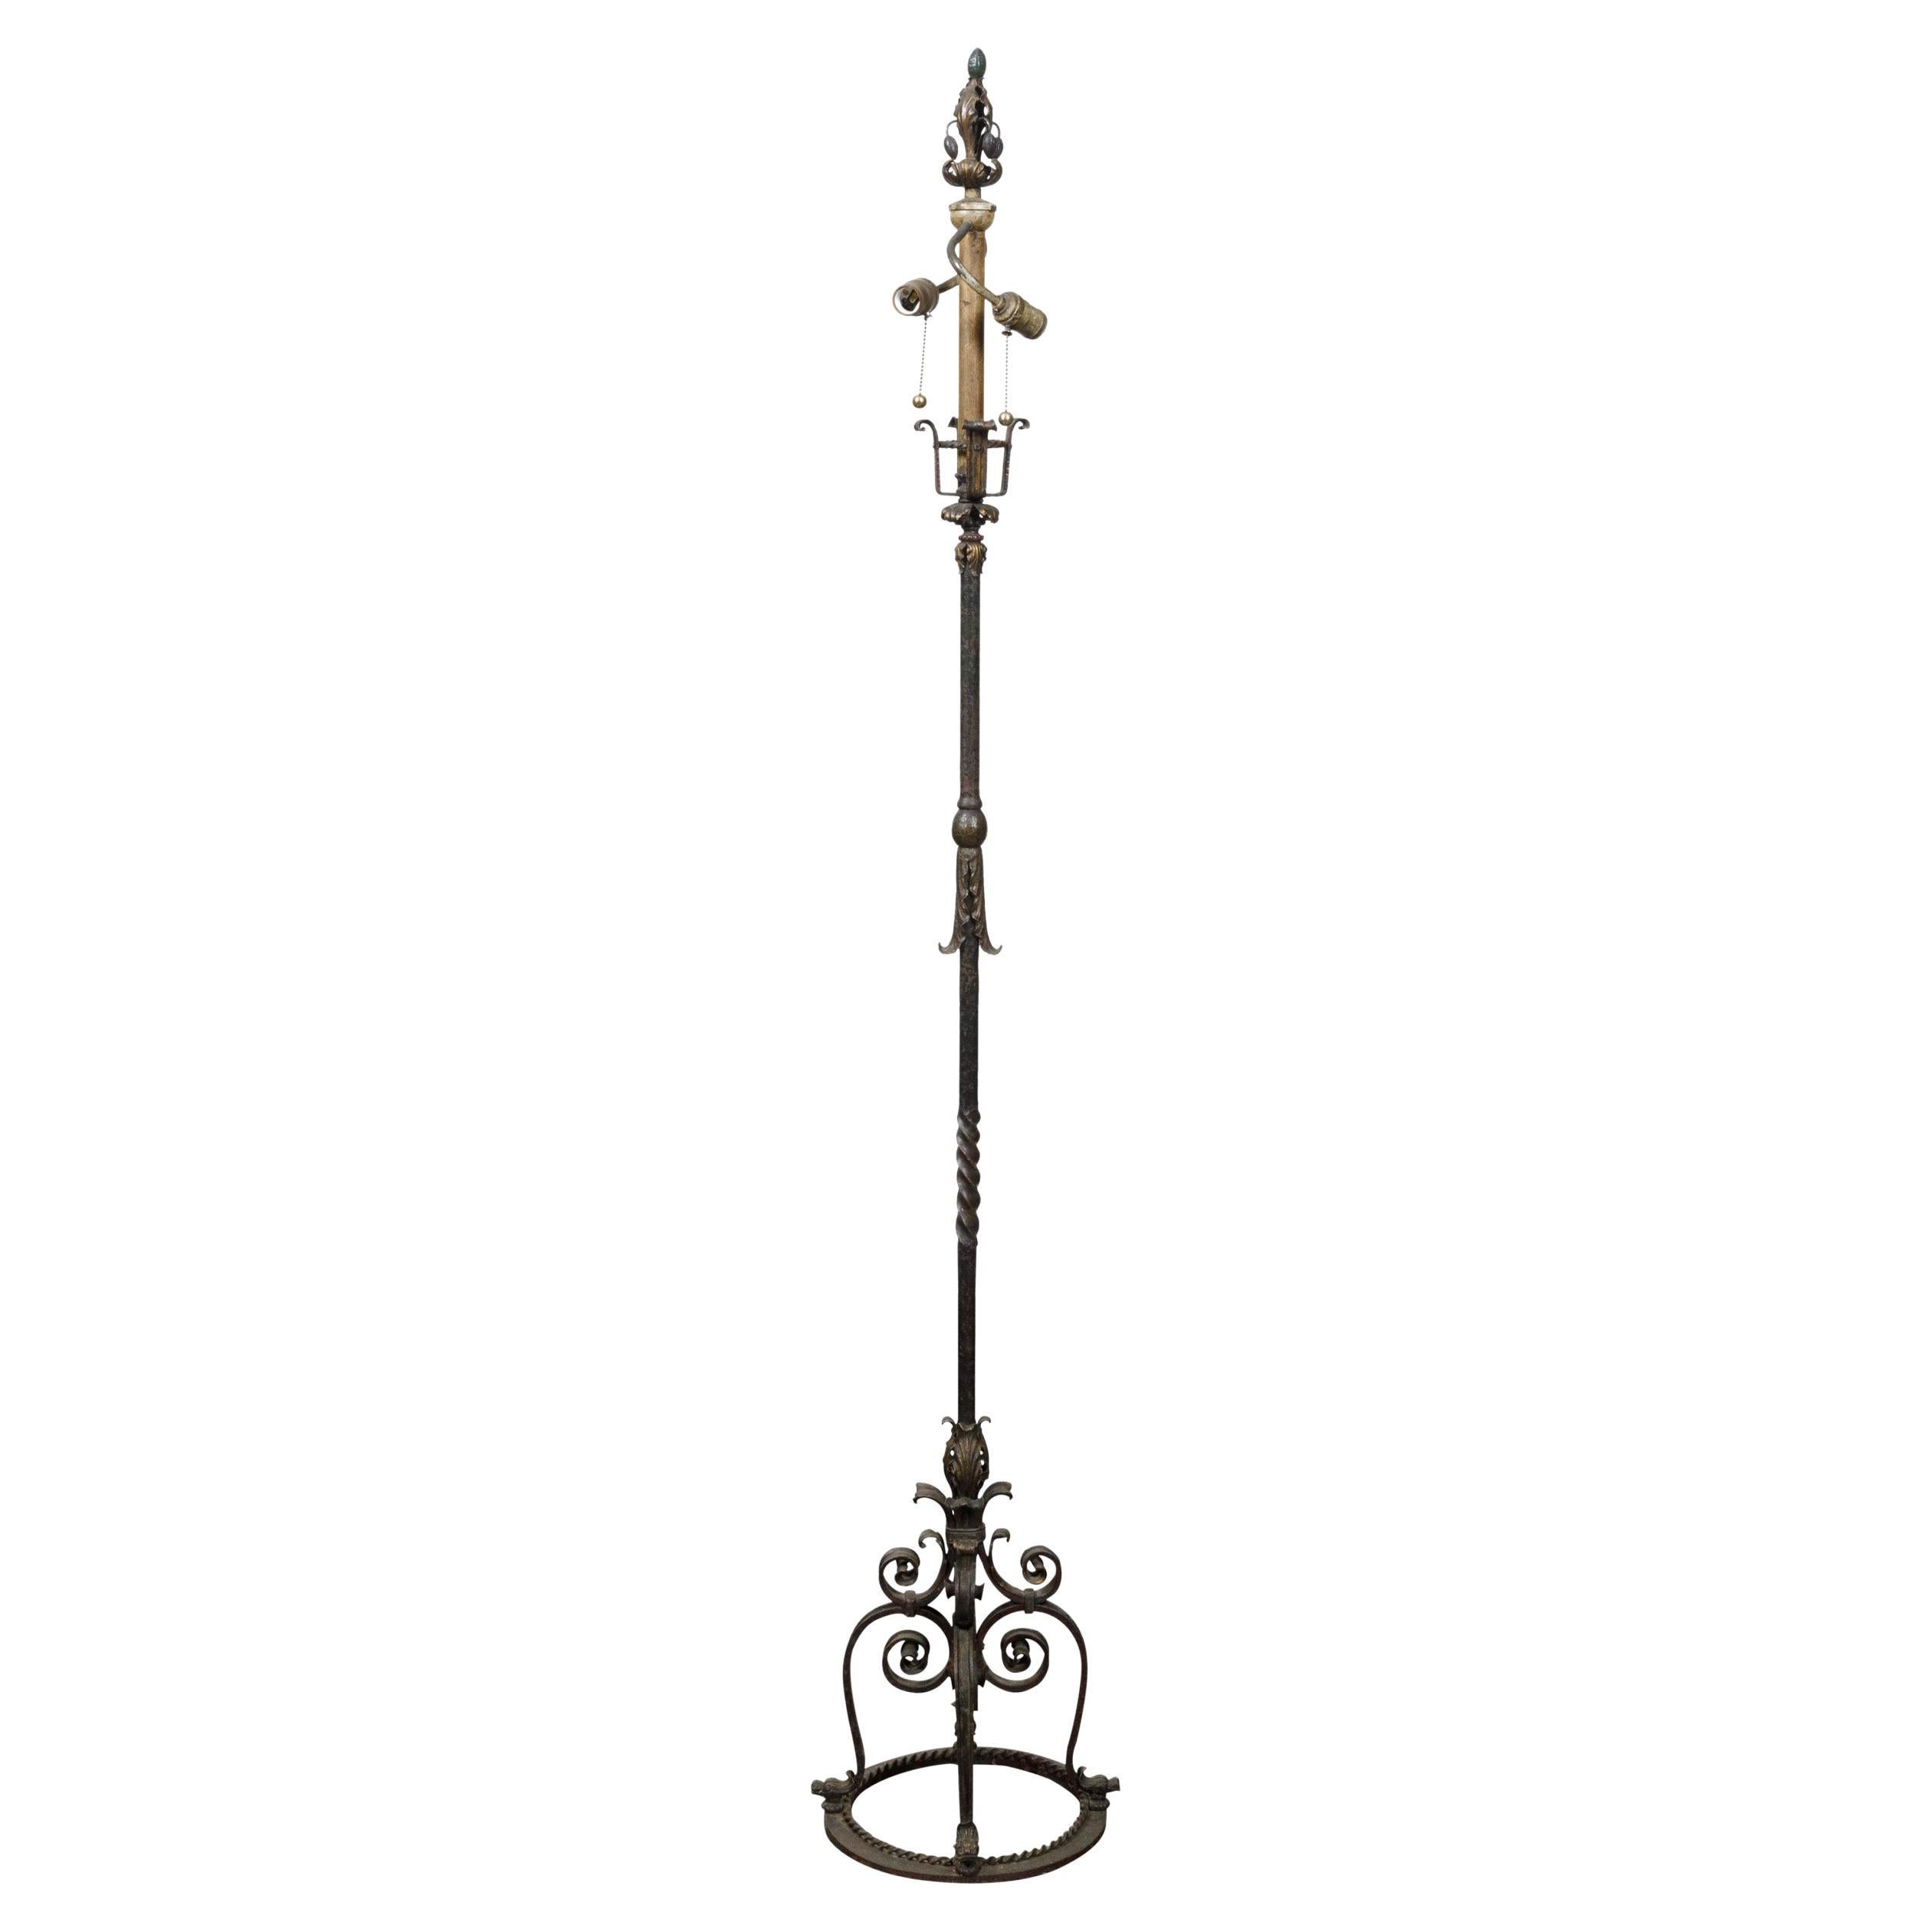 French Steel and Brass 1930s Floor Lamp with Scrolling Legs and Foliage Motifs For Sale